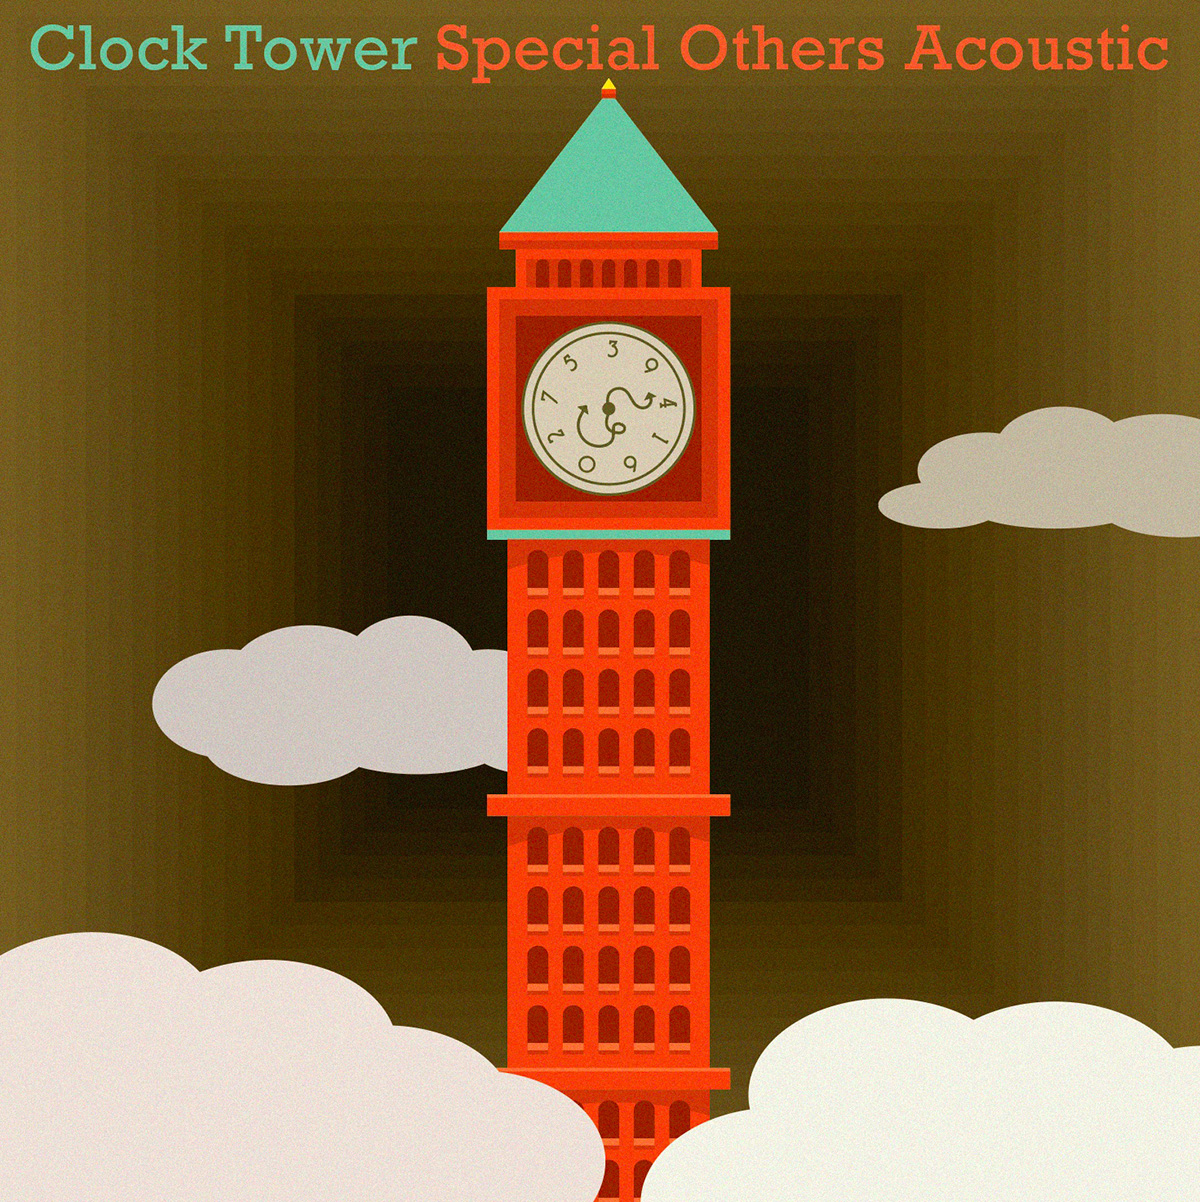 SPECIAL OTHERS ACOUSTIC
『Clock Tower』